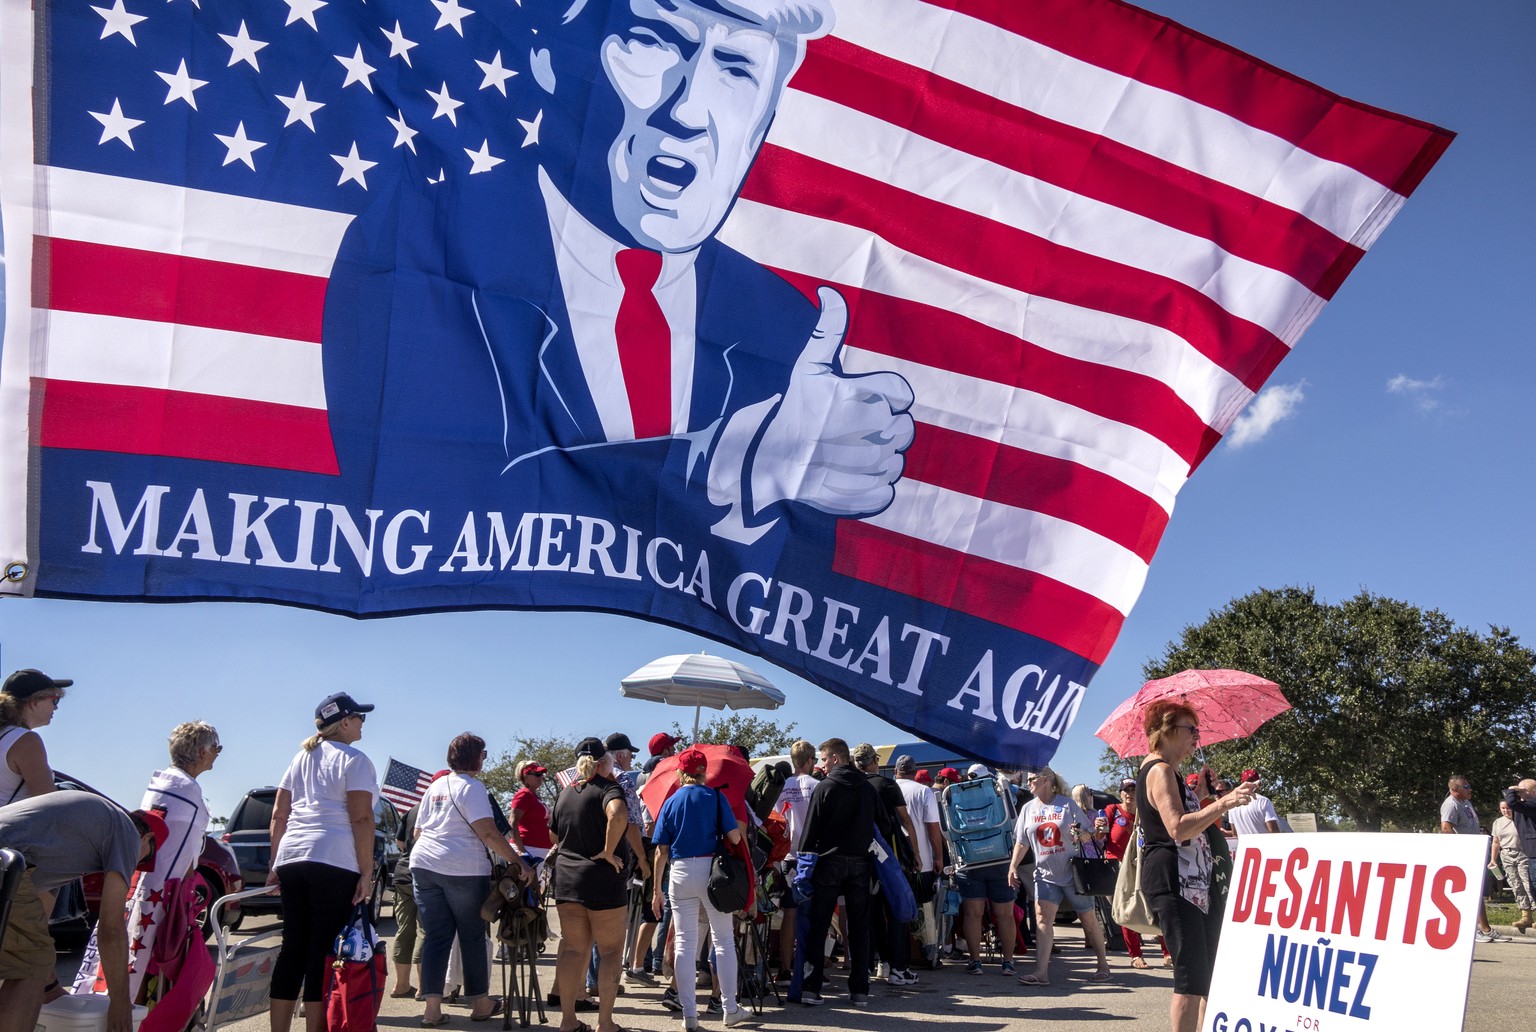 epa07133997 US President Donald J. Trump’s supporters make a line to attend the Make America Great Again Rally in Hertz Arena, Fort Myers, Florida, USA, 31 October 2018. Trump holds a national midterm ...